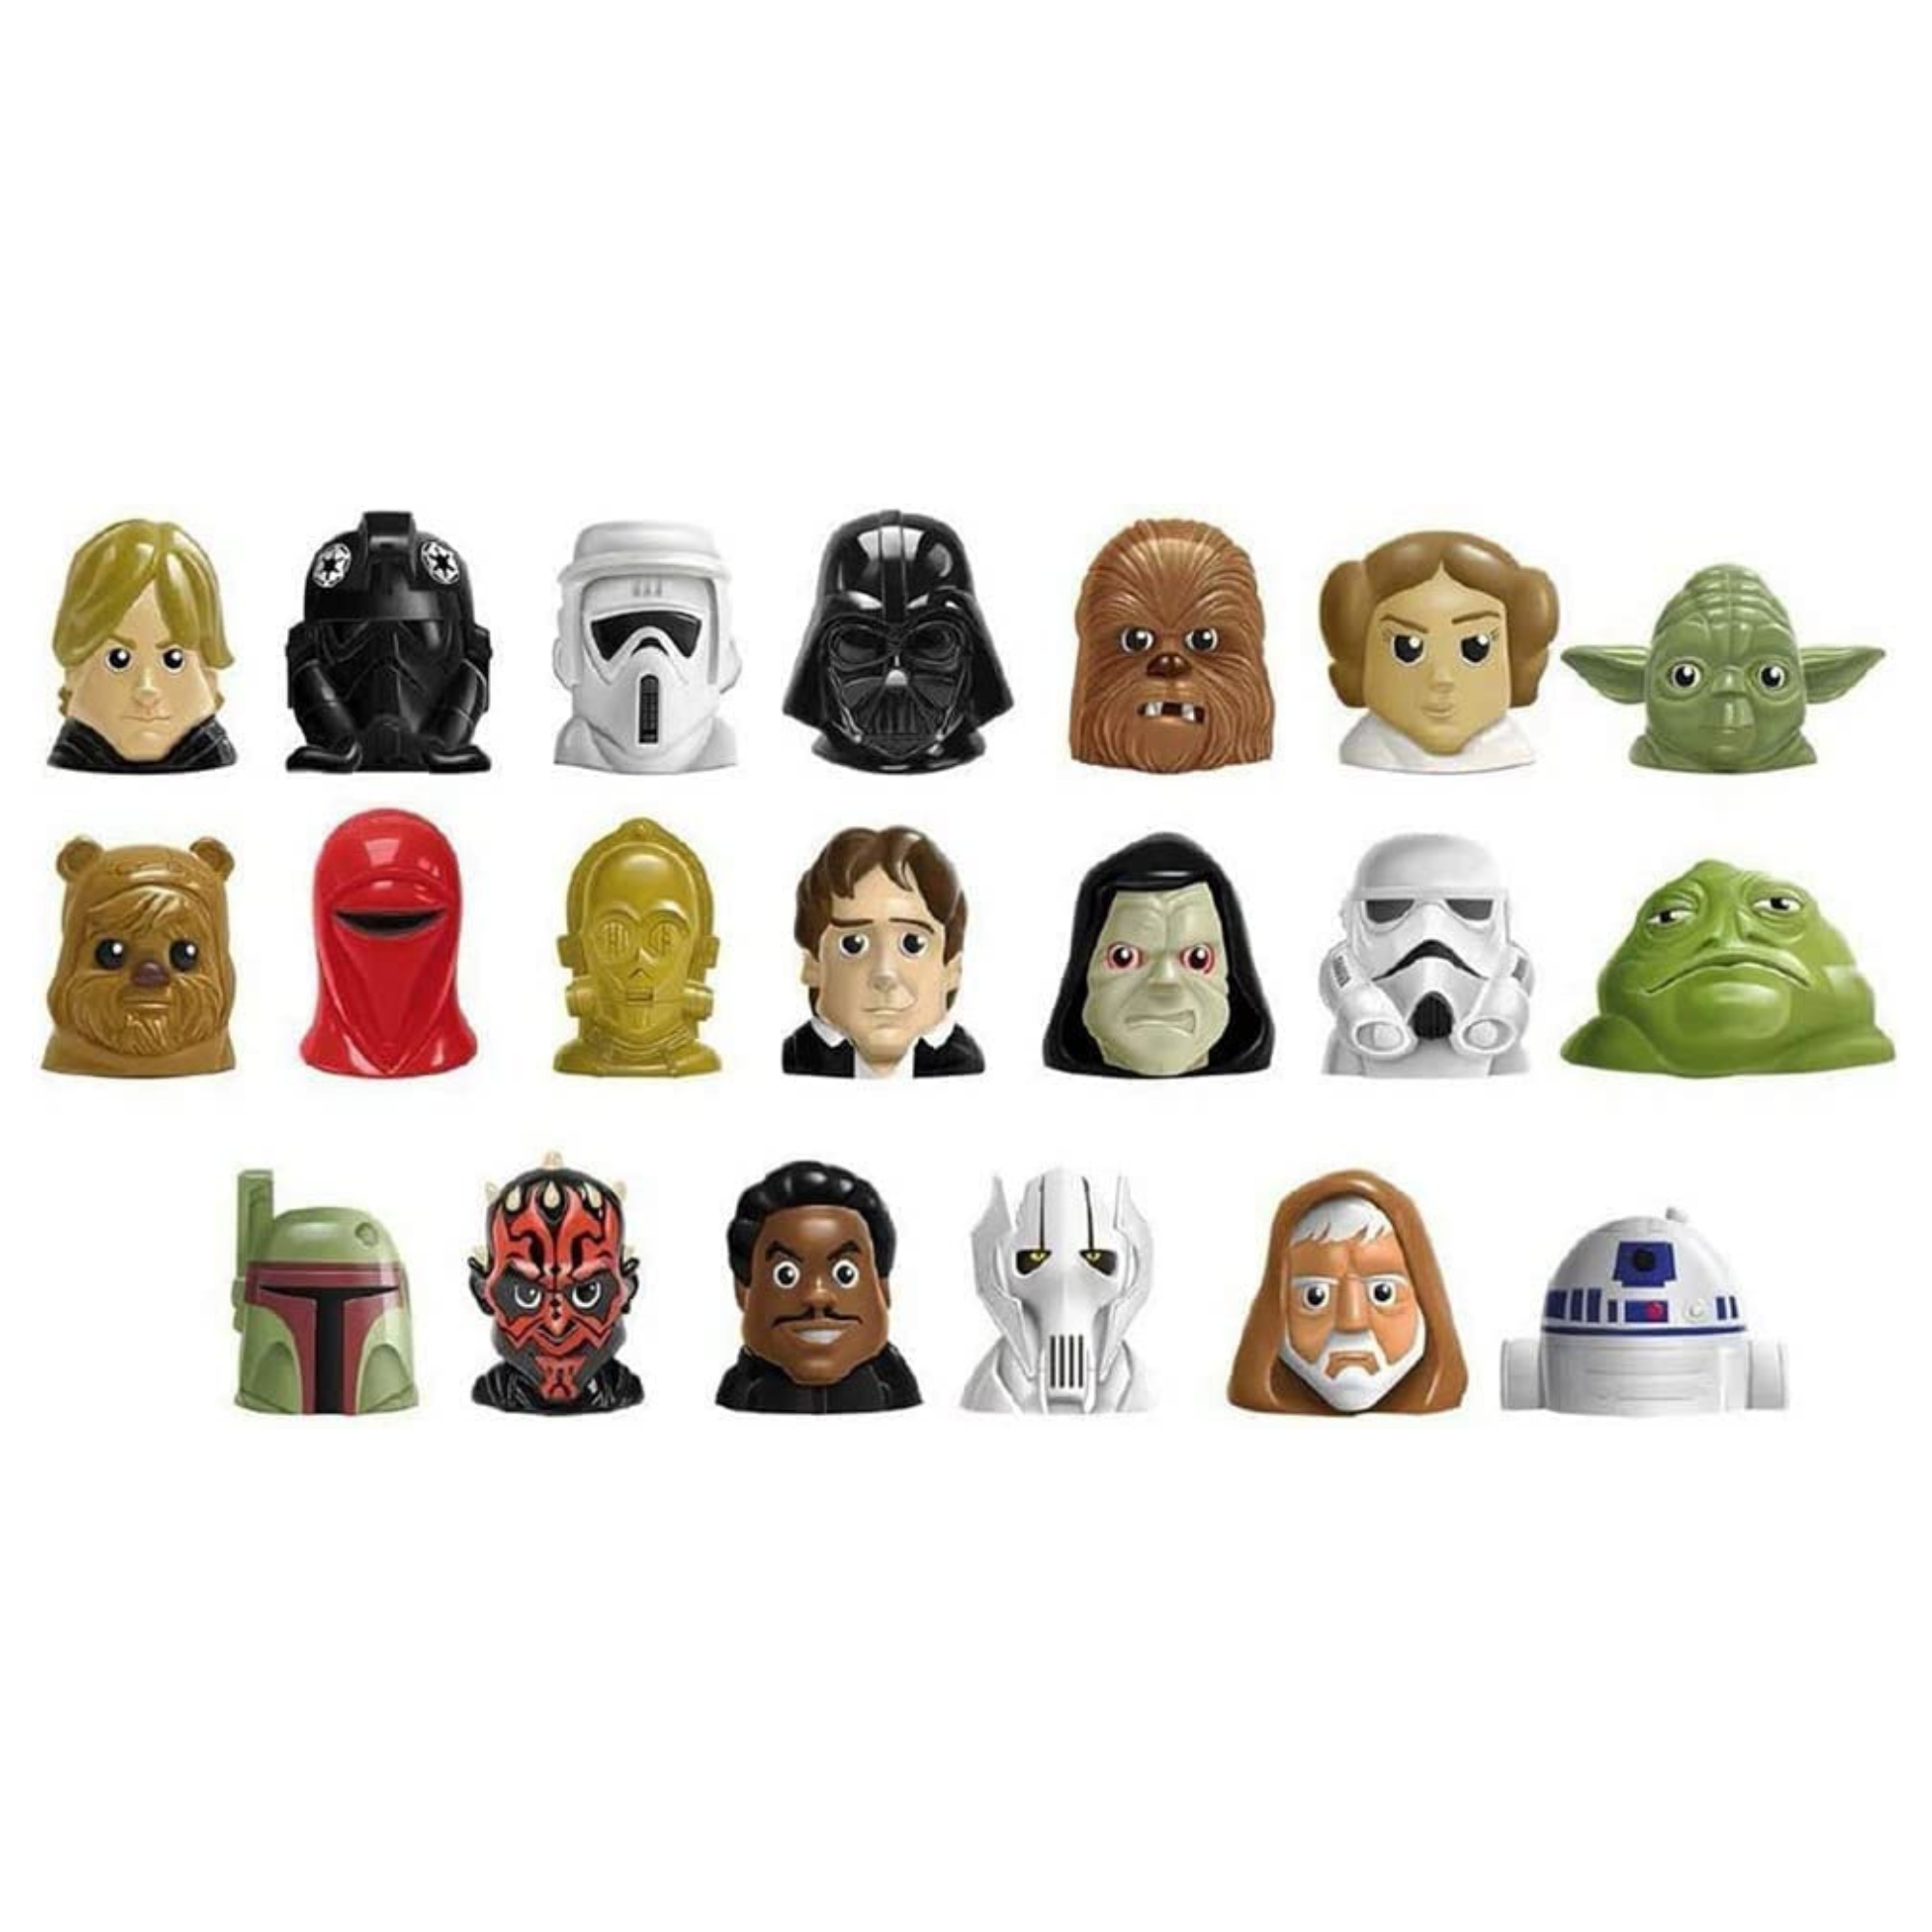 Star Wars Wikkeez Blind Bag Counter Display Unit of 24 Bags - 2 Characters Per Bag - Toptoys2u